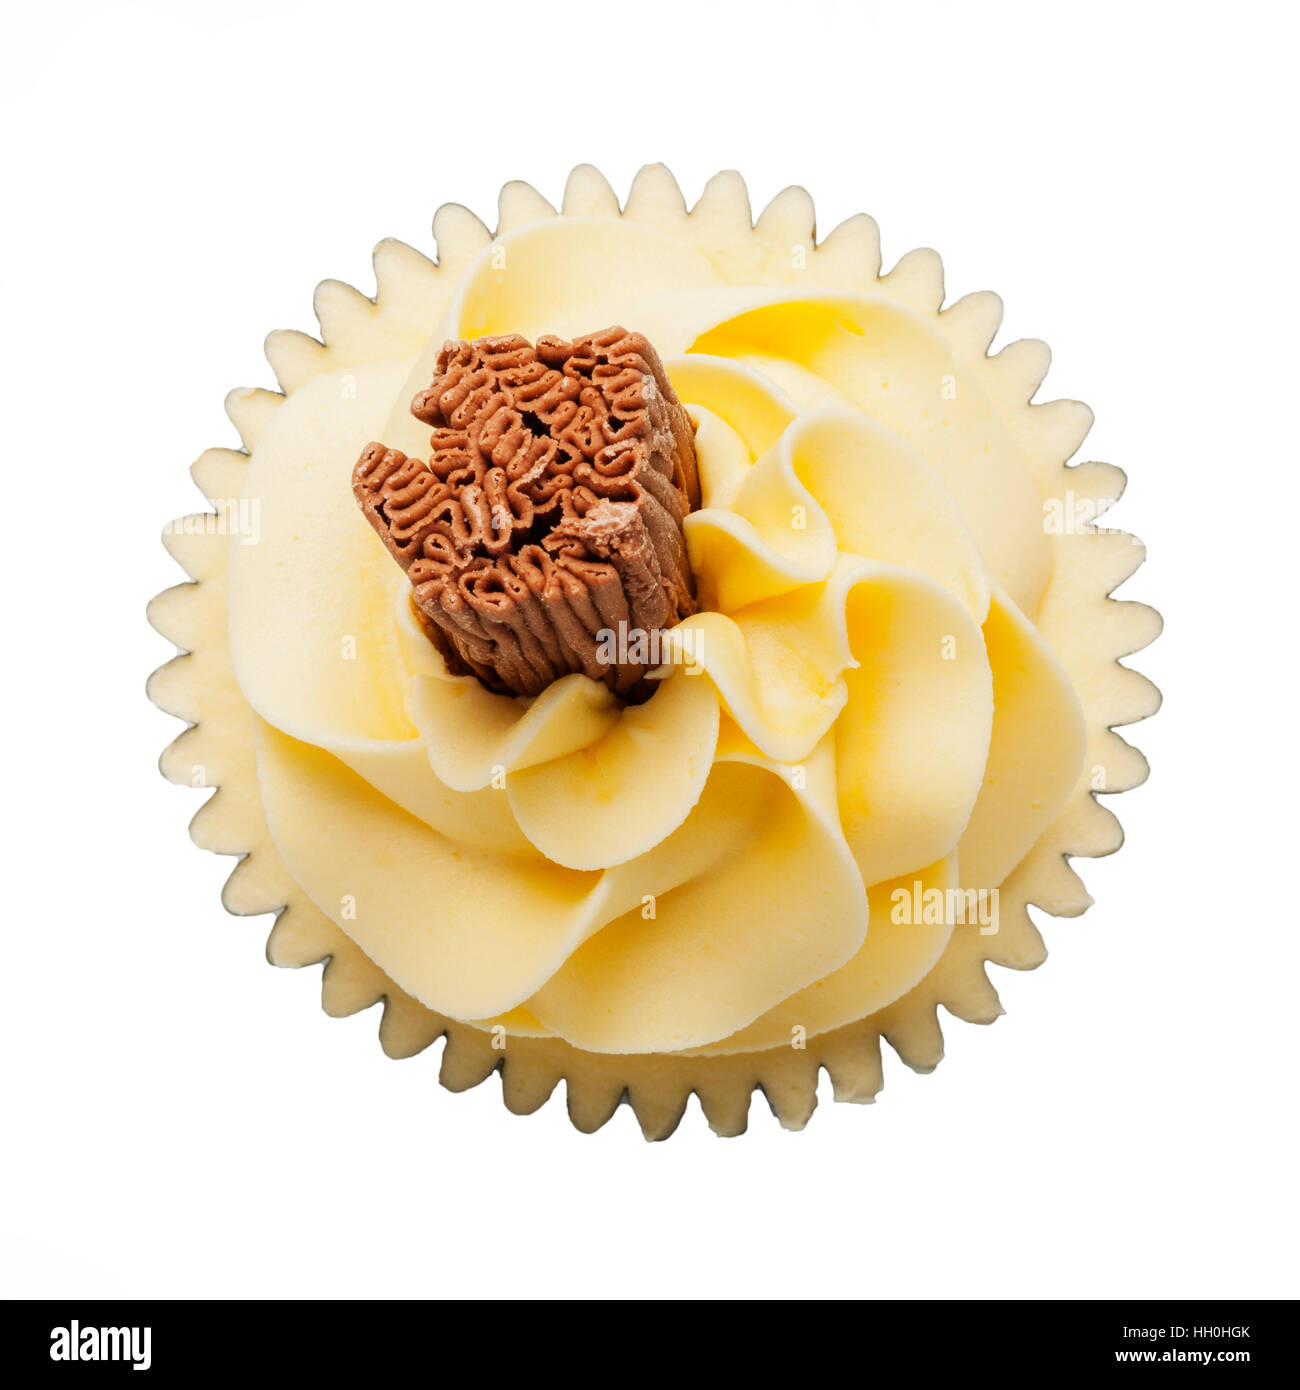 A home made vanilla cupcake on a white background Stock Photo